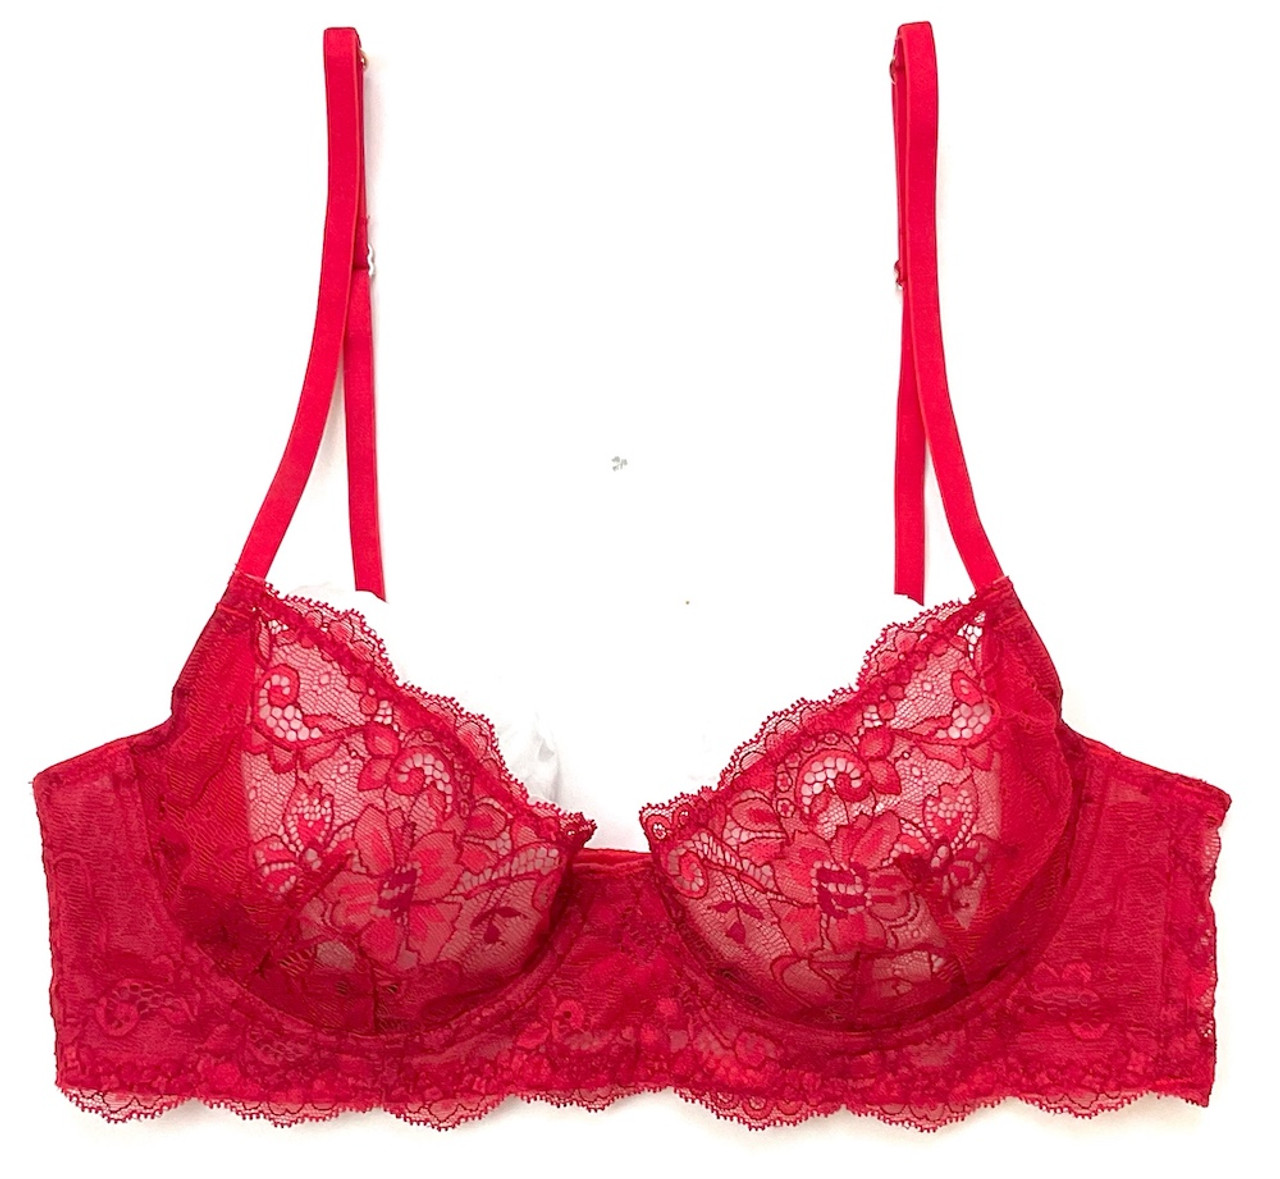 BCBGENERATION THE TRUE LOVE TRIANGLE BRA LACE RED #BC14S305 SMALL NEW! $36  